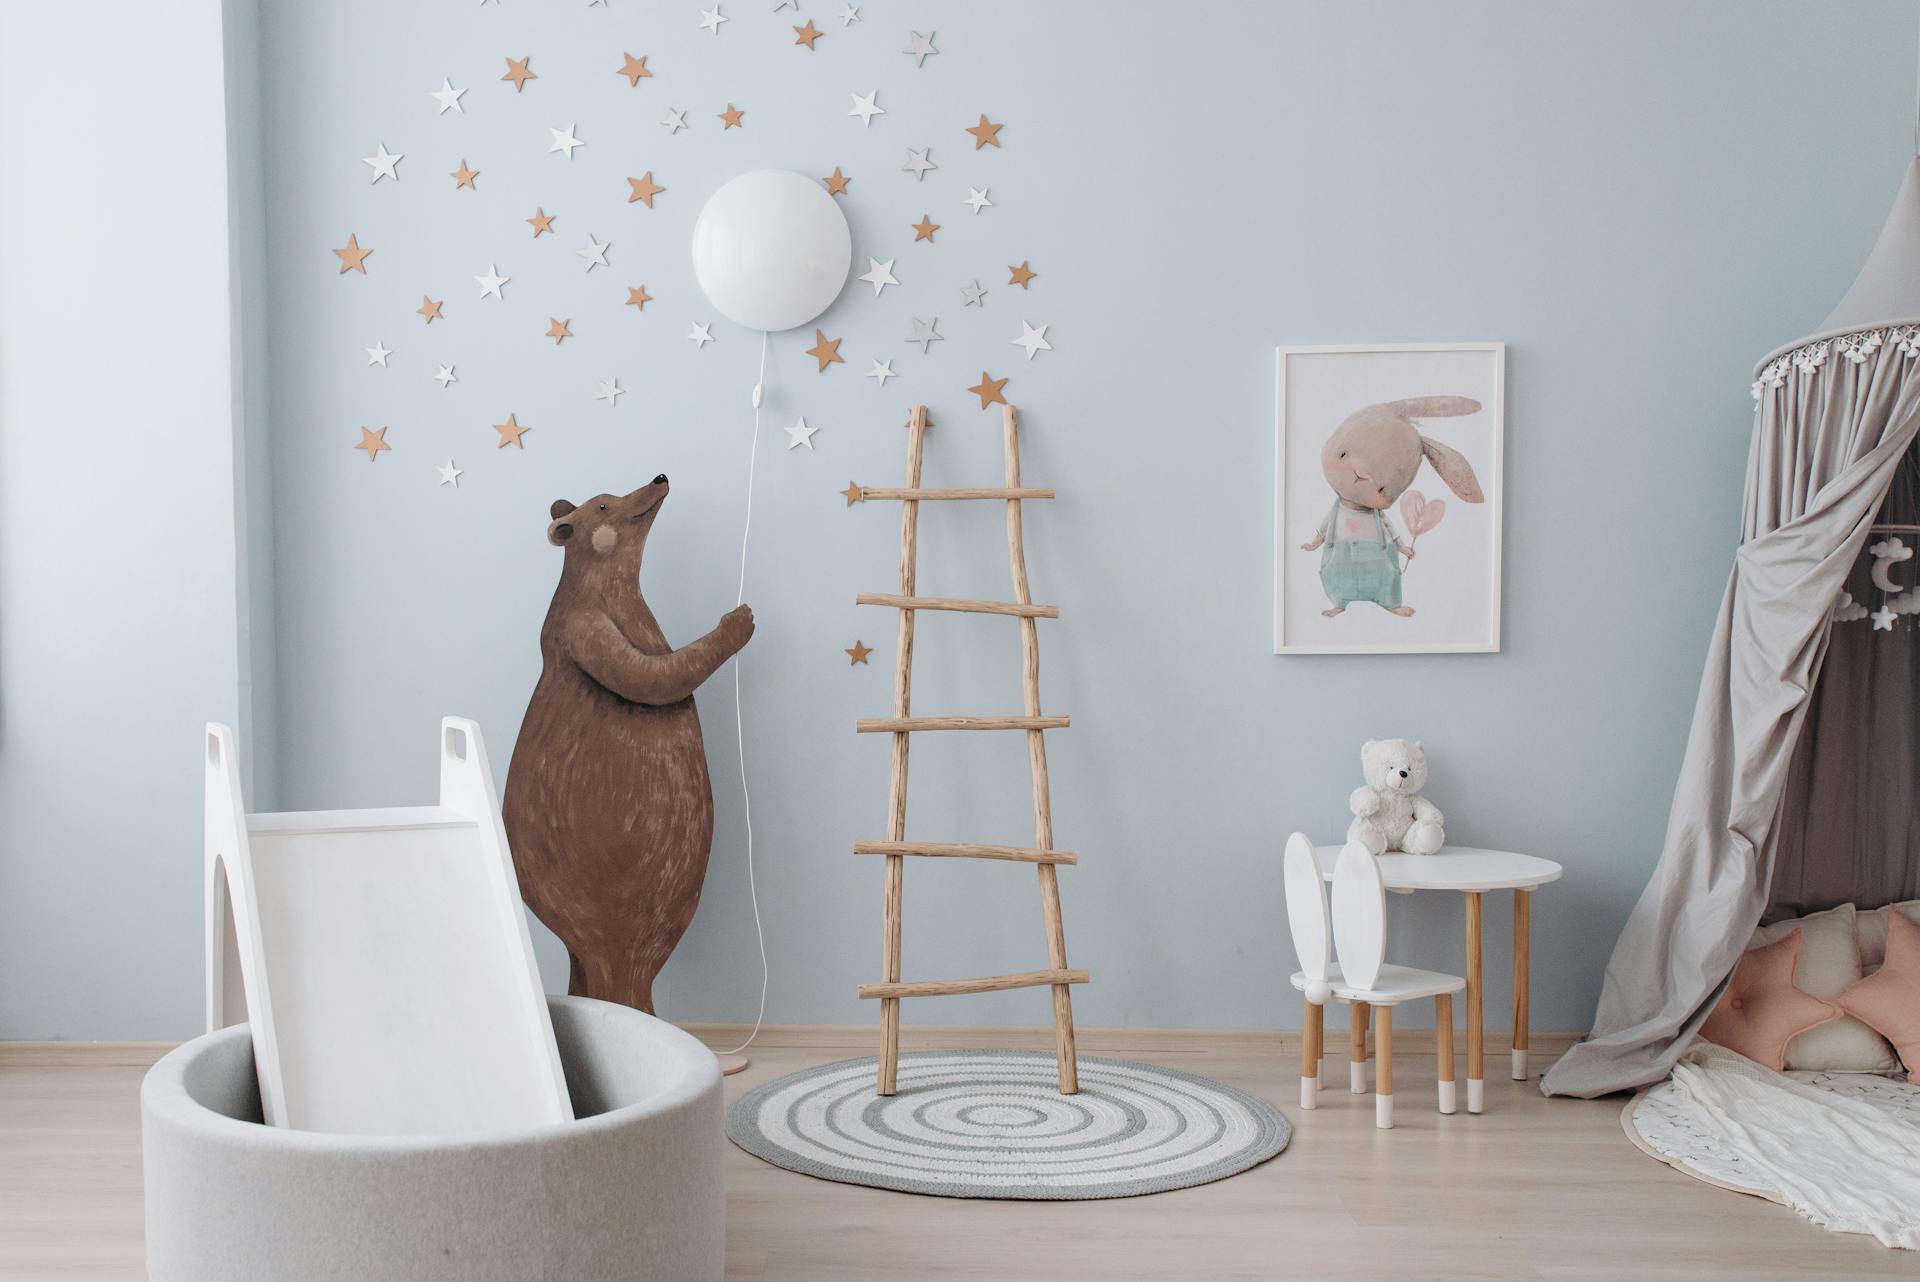 A nursery with decorations | Source: Pexels